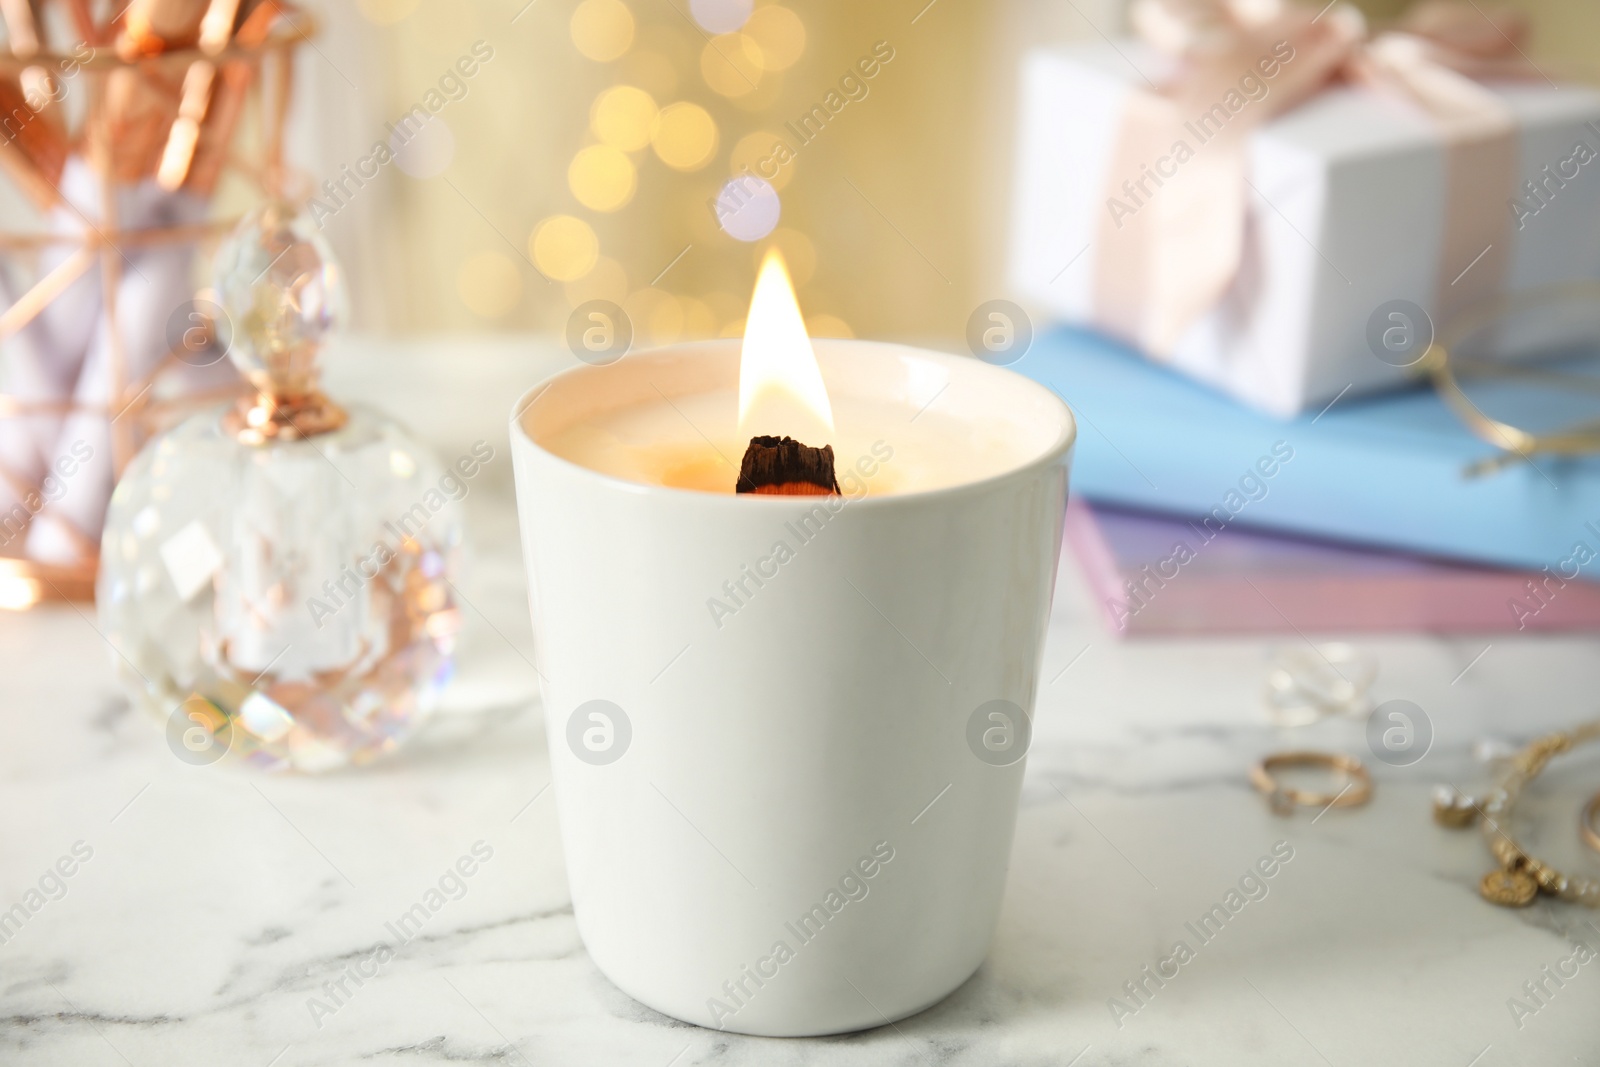 Photo of Burning candle with wooden wick on white table